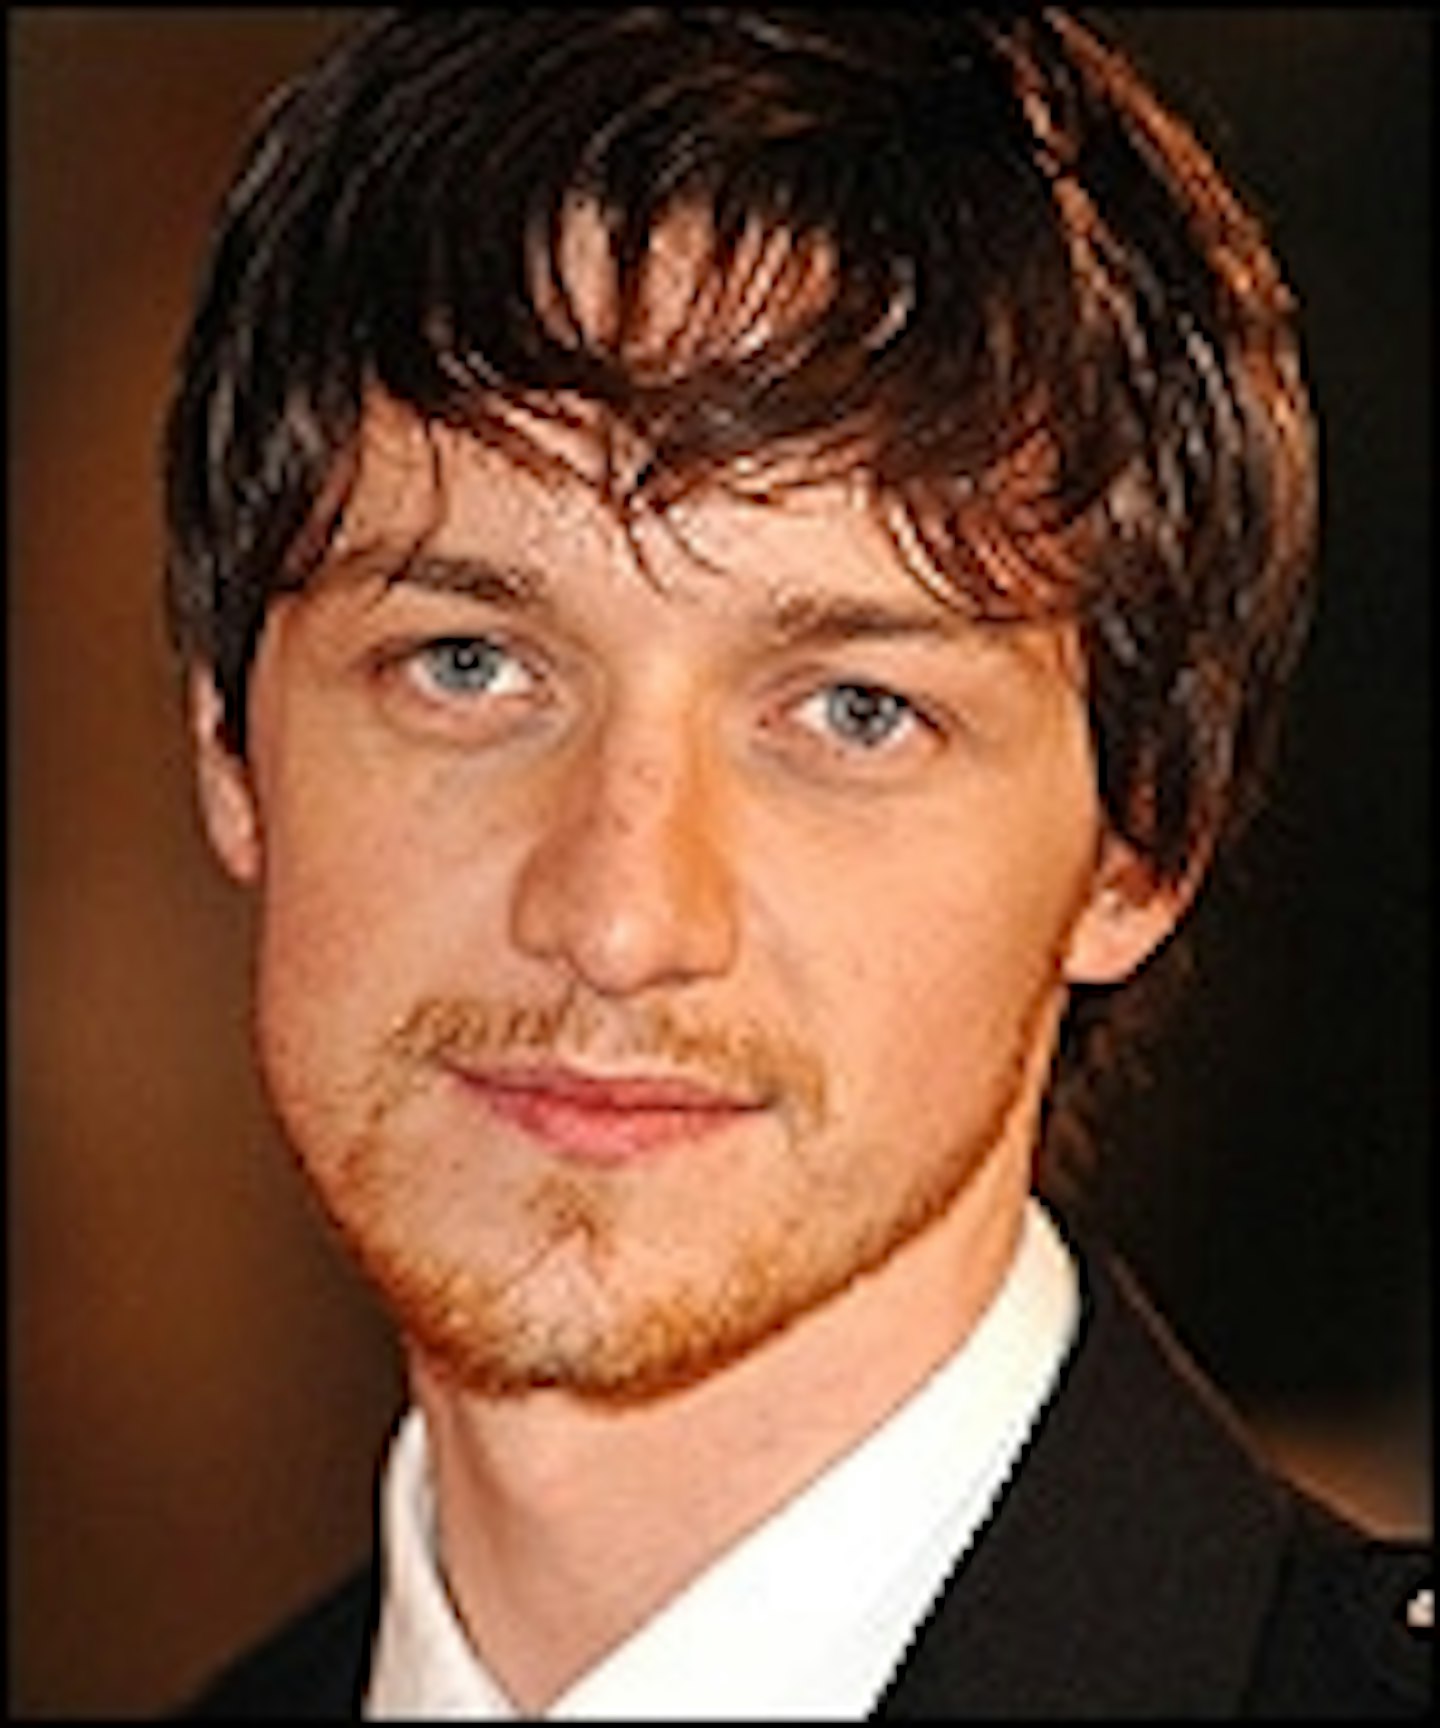 James McAvoy Says 'I'm With Cancer'